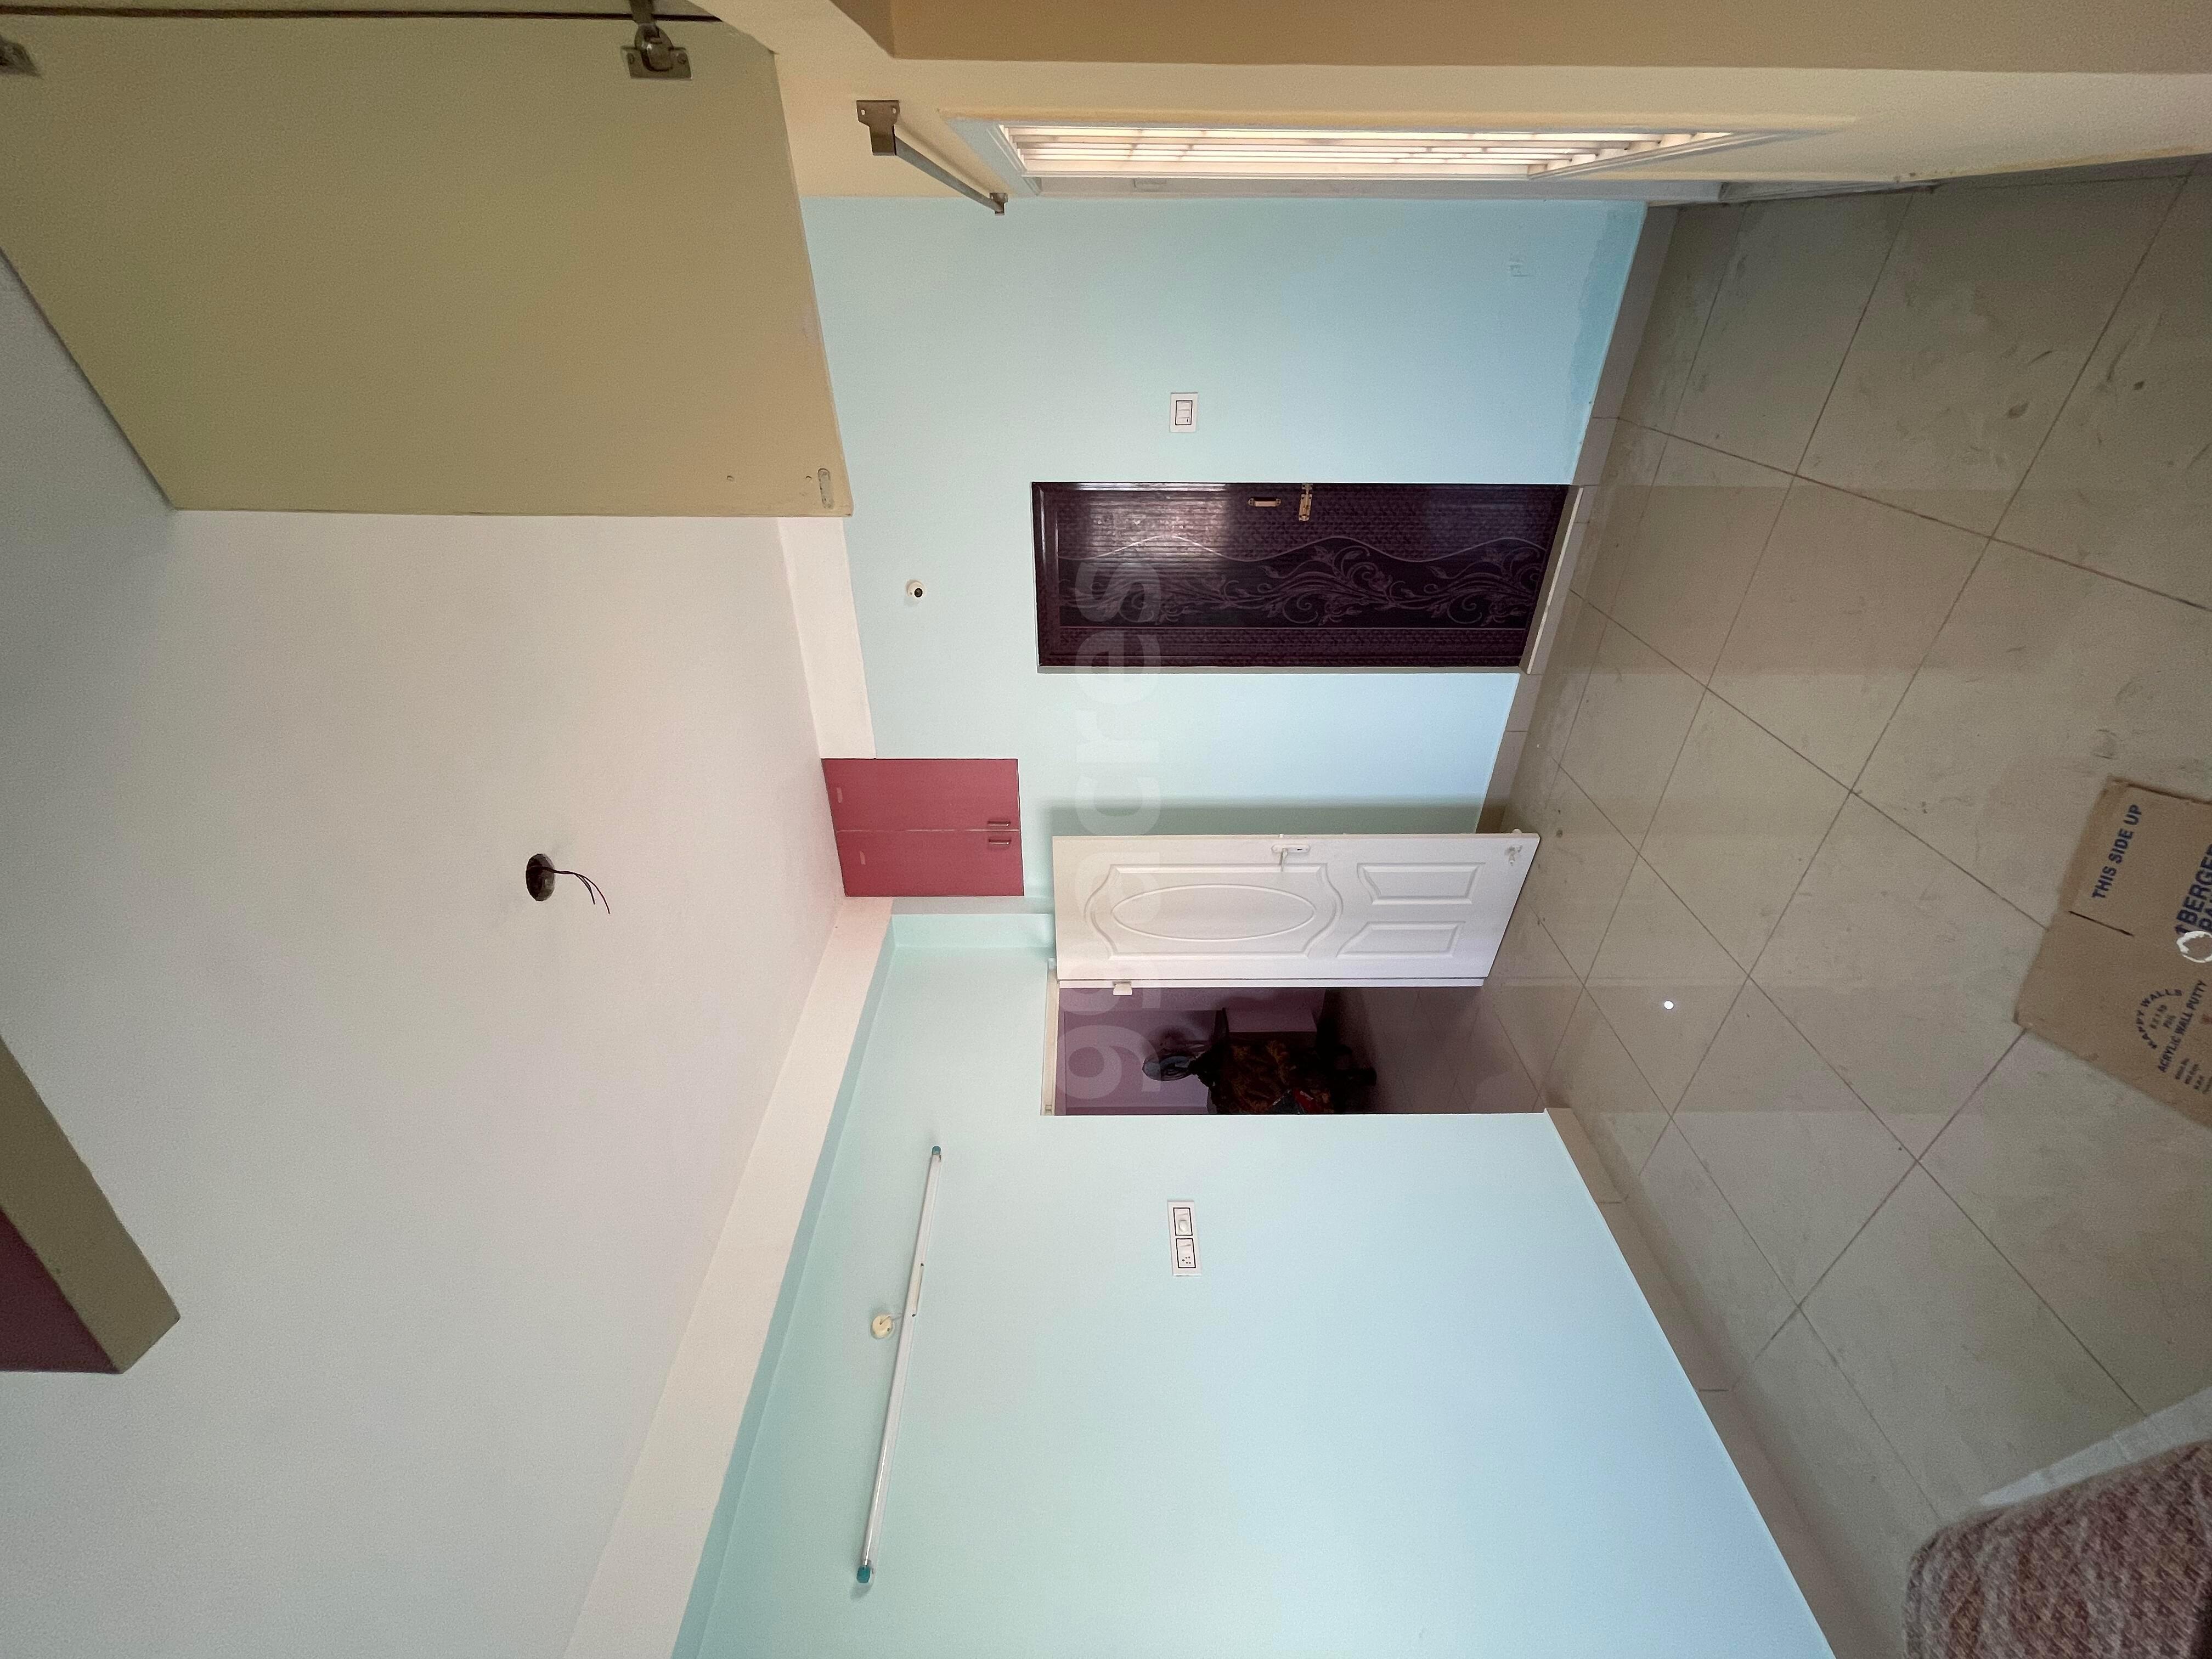 7989-for-sale-2BHK-Residential-Apartment-Rs-5500000-in-Saram-New-Saram-Puducherry